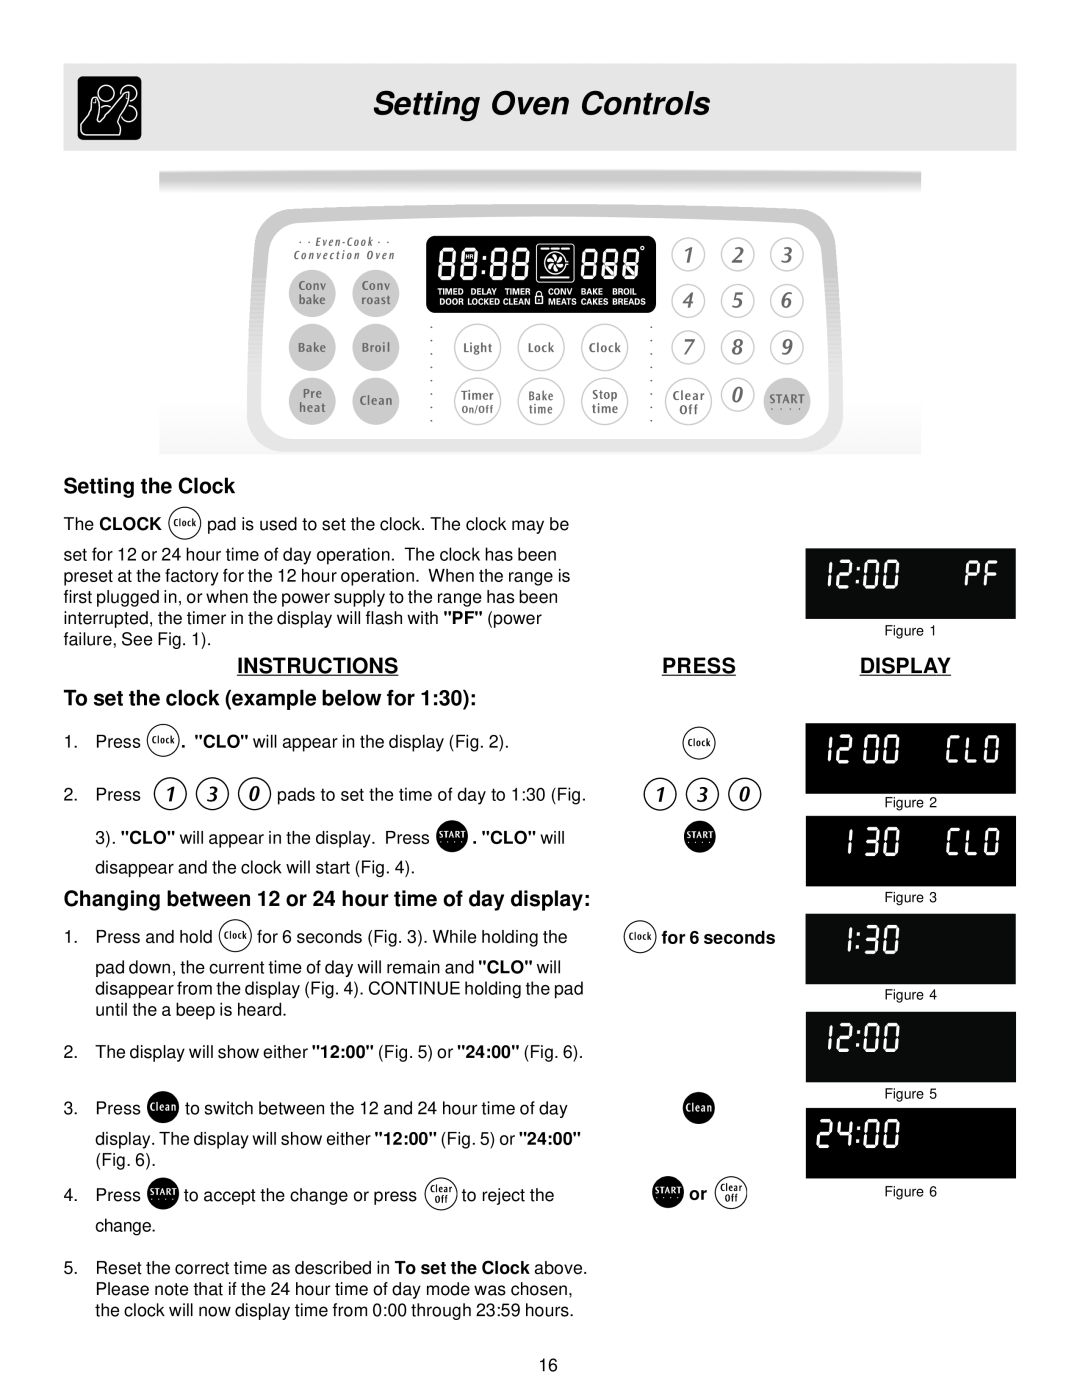 Frigidaire ES40 Setting Oven Controls, Setting the Clock, INSTRUCTIONS To set the clock example below for, Press, Display 